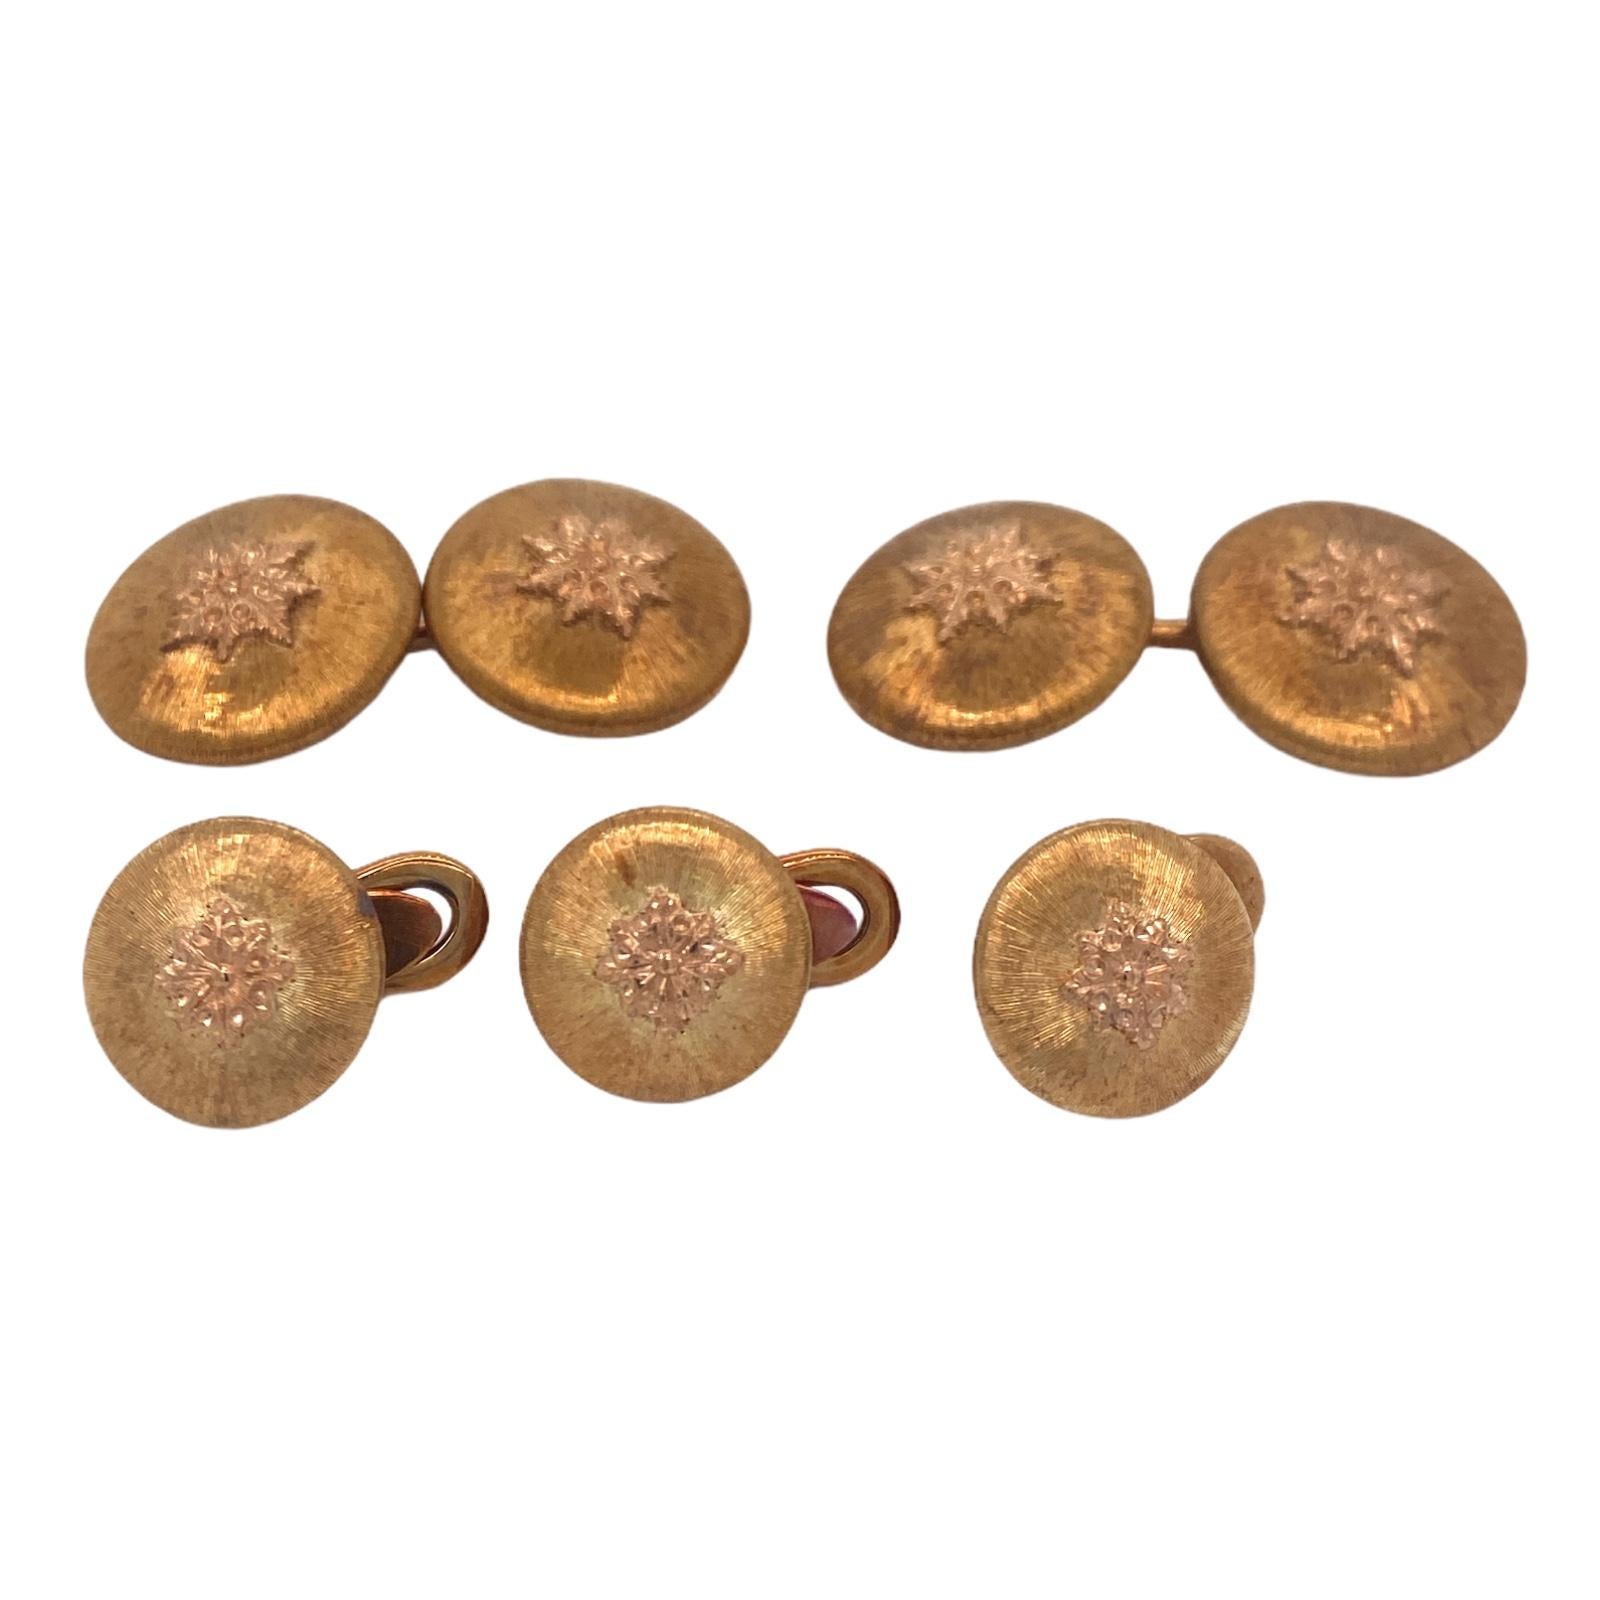 Buccellati cufflinks and stud set fashioned in 18 karat yellow gold. The 1960's set comes in its original box. The cufflinks measure 16.3mm in diameter, and the studs measure 12mm in diameter. 